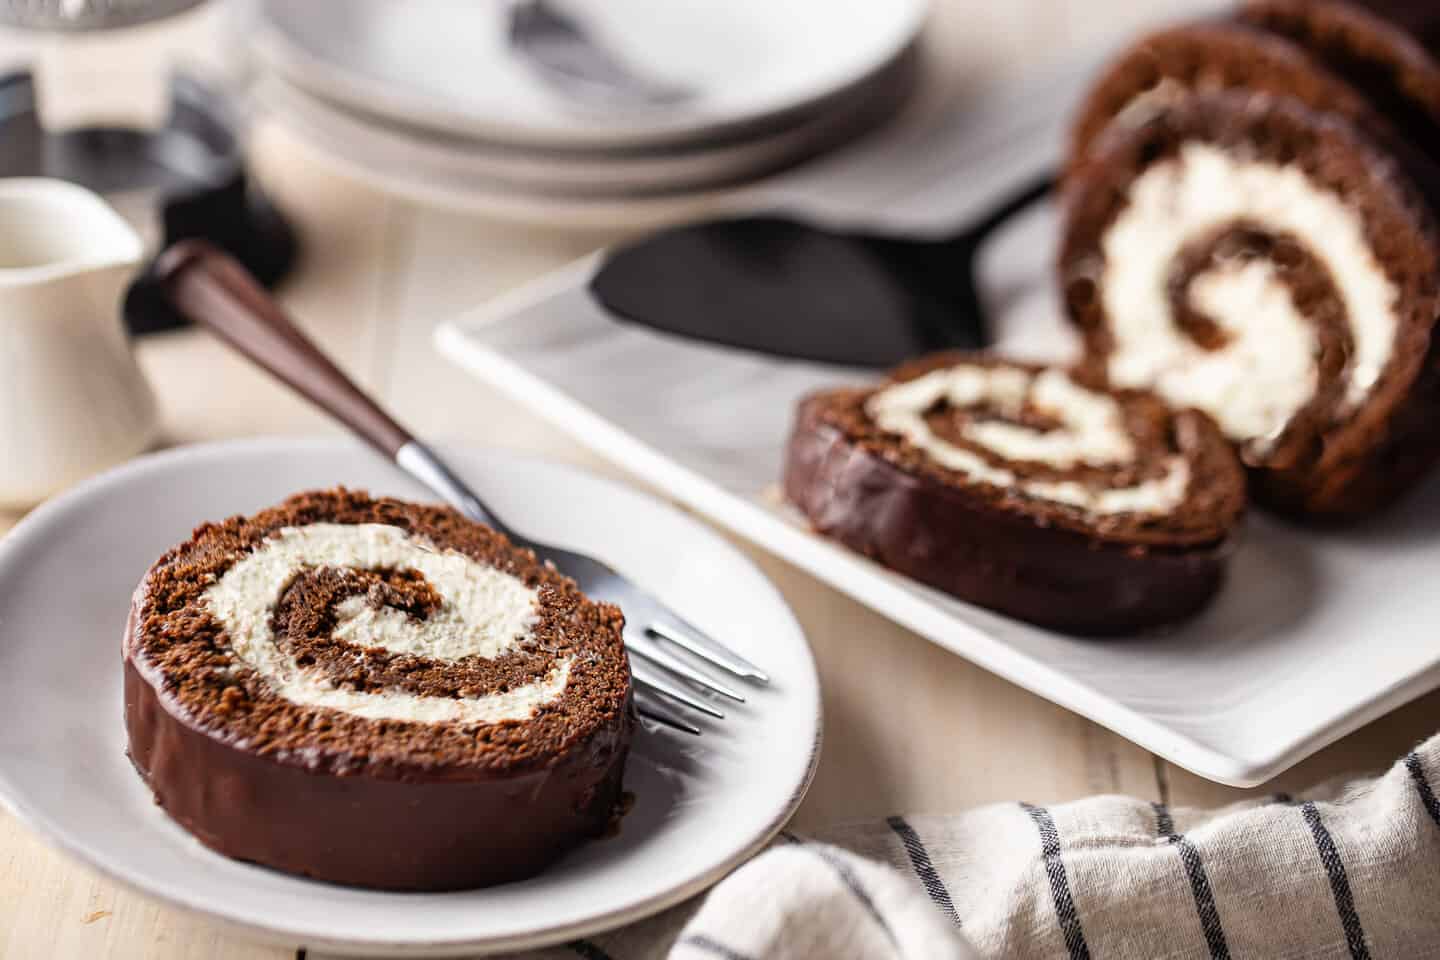 Recipe for Swiss cake roll, prepared, sliced, and served on a white wood tabletop.